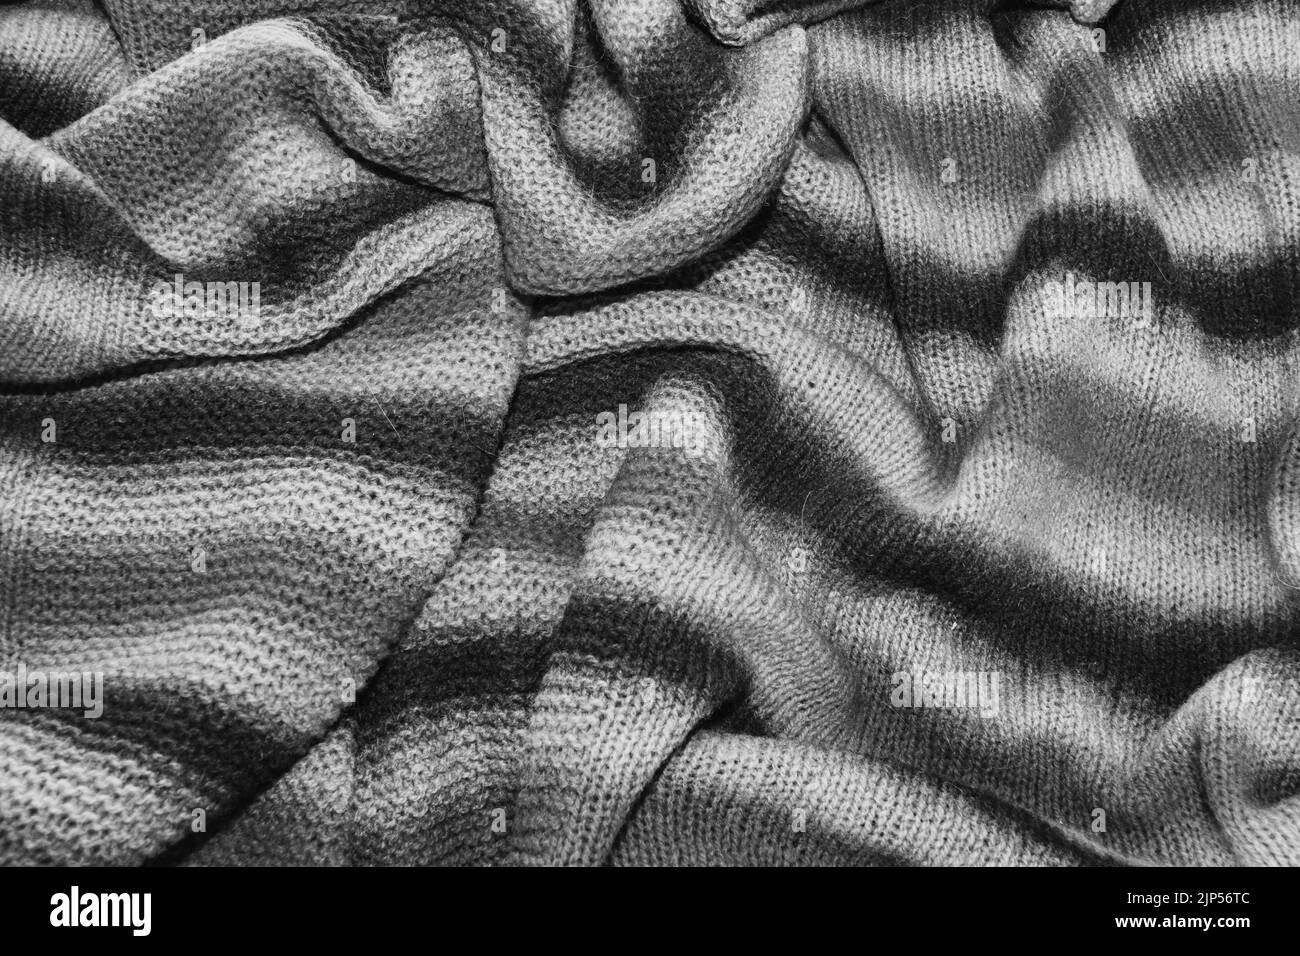 Black and white background of a knitted textile material. Fabric with a striped texture closeup. Stock Photo